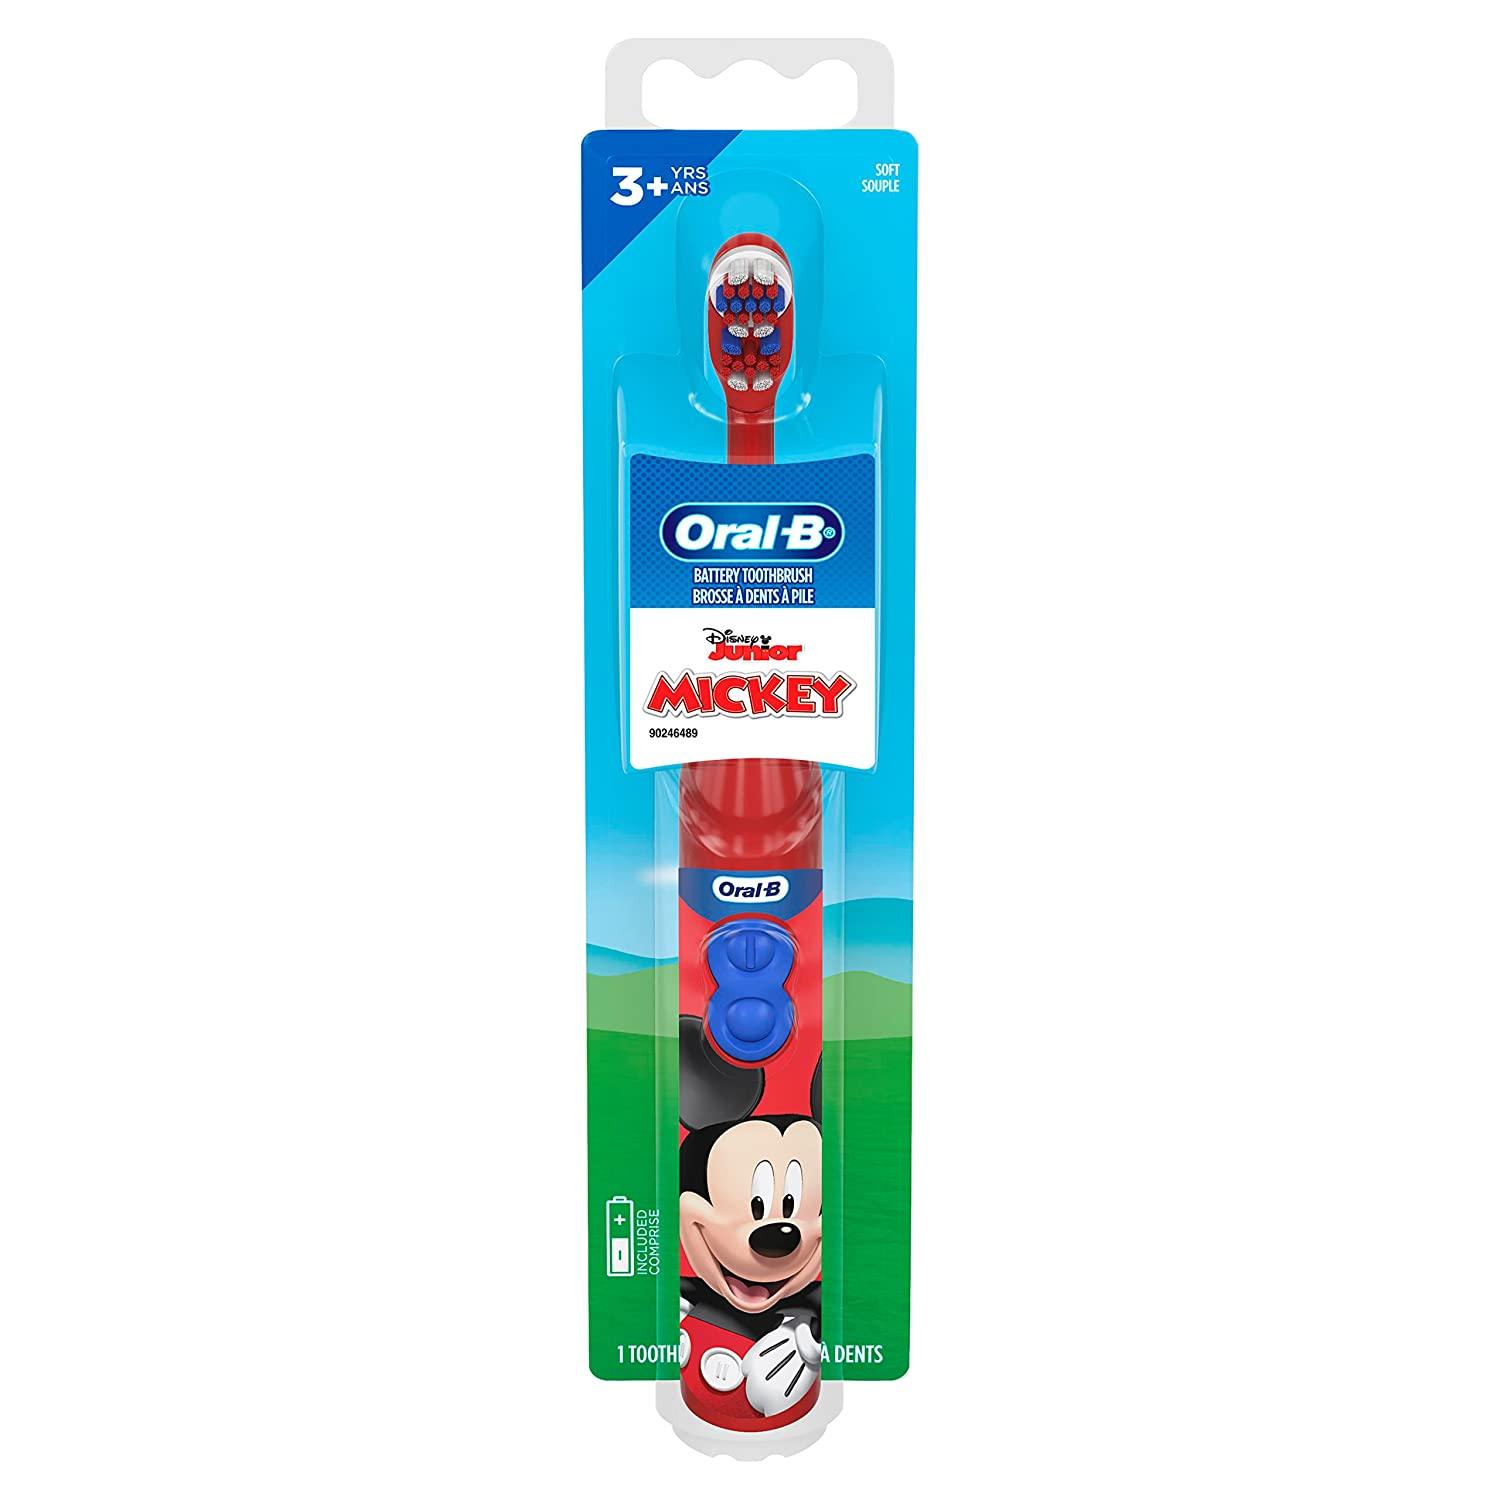 Oral-B Kid's Battery Toothbrush Featuring Disney's Mickey Mouse - BumbleToys - 5-7 Years, Baby Saftey & Health, Boys, Girls, Oral-B, Pre-Order, Toothbrush